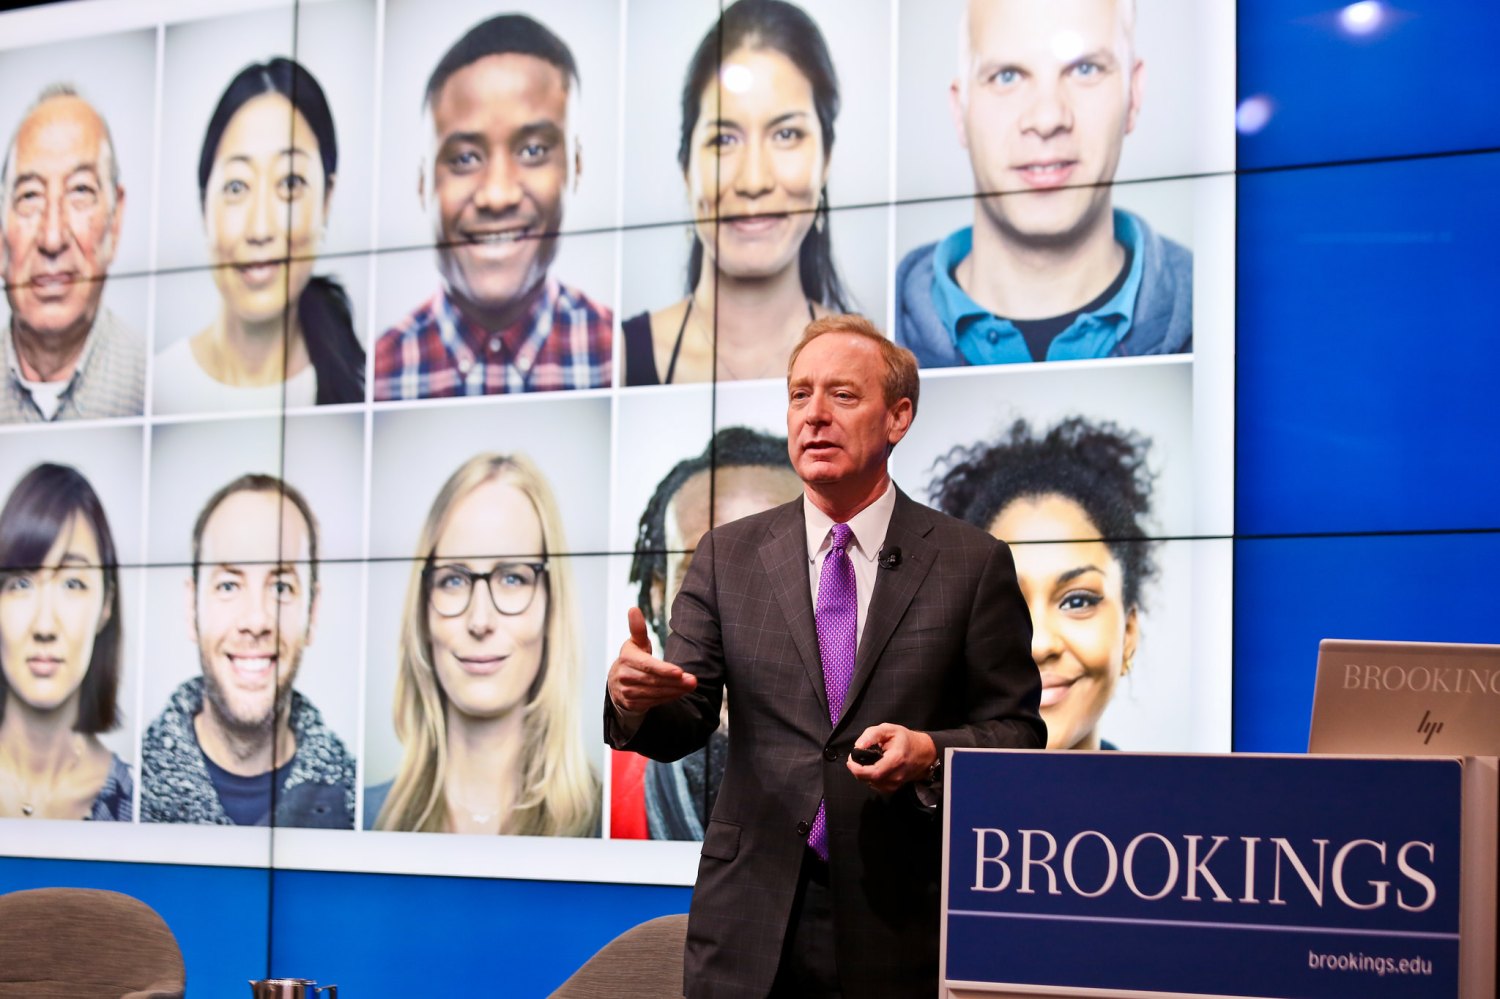 President of Microsoft, Brad Smith, gives a presentation on facial recognition